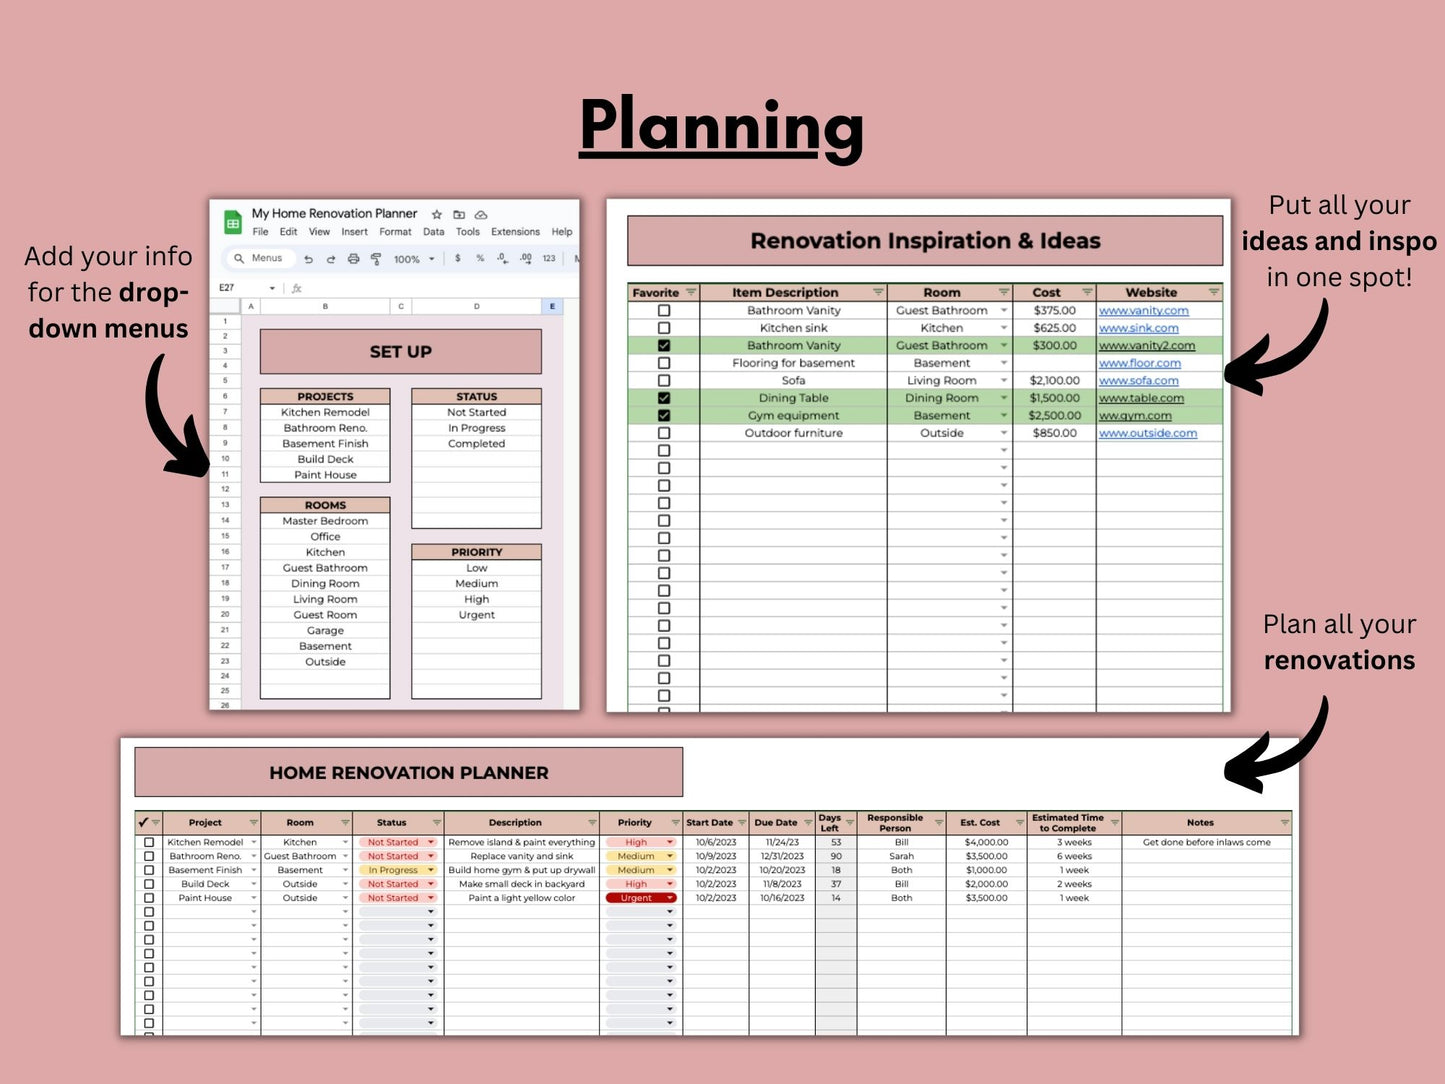 Home Renovation Planner | Google Sheets Template